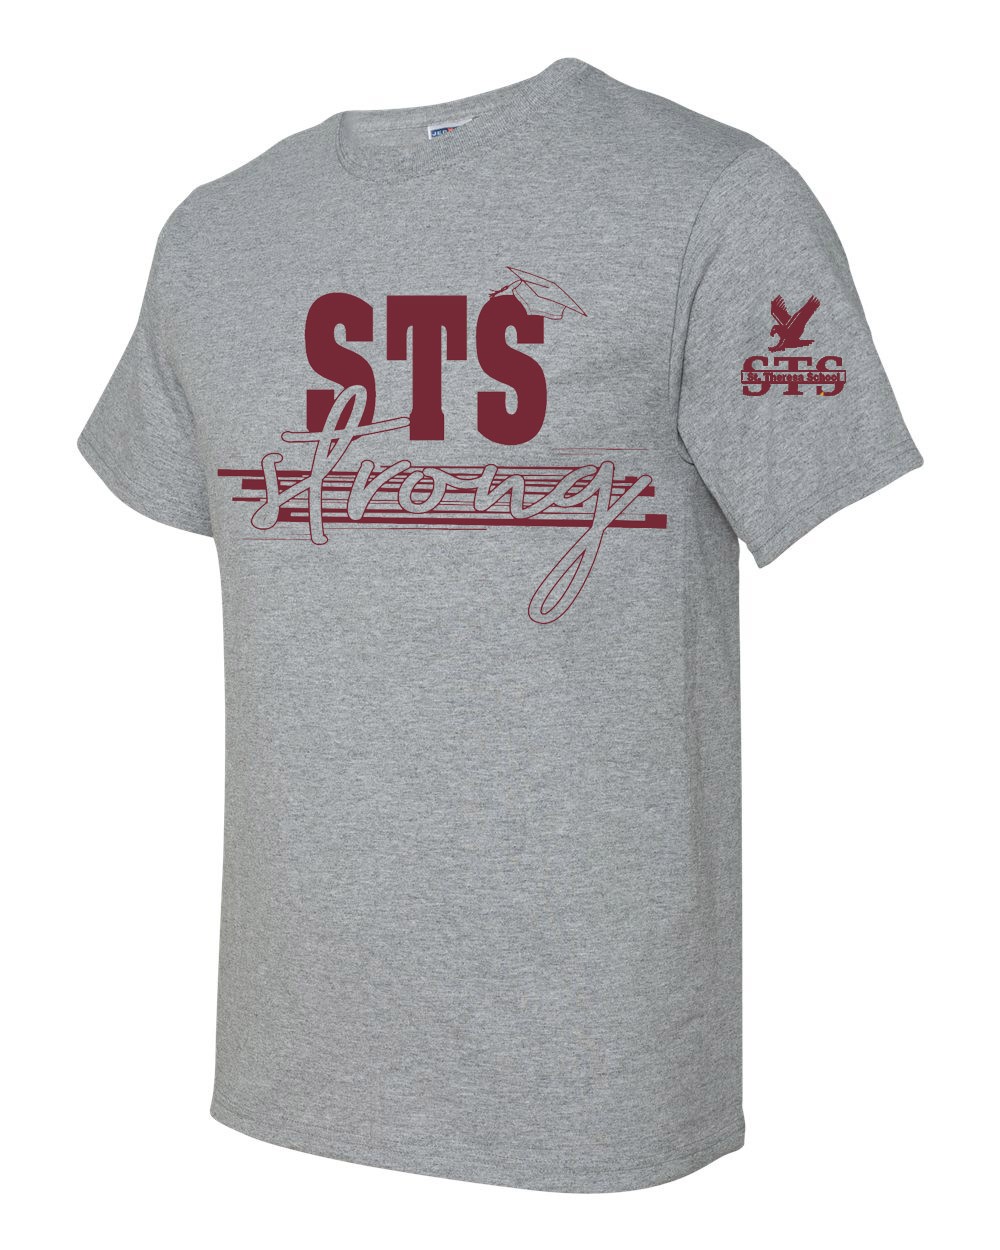 STS Staff S/S Strong Spirit T-Shirt w/ Maroon Logo - Please Allow 2-3 Weeks for Delivery